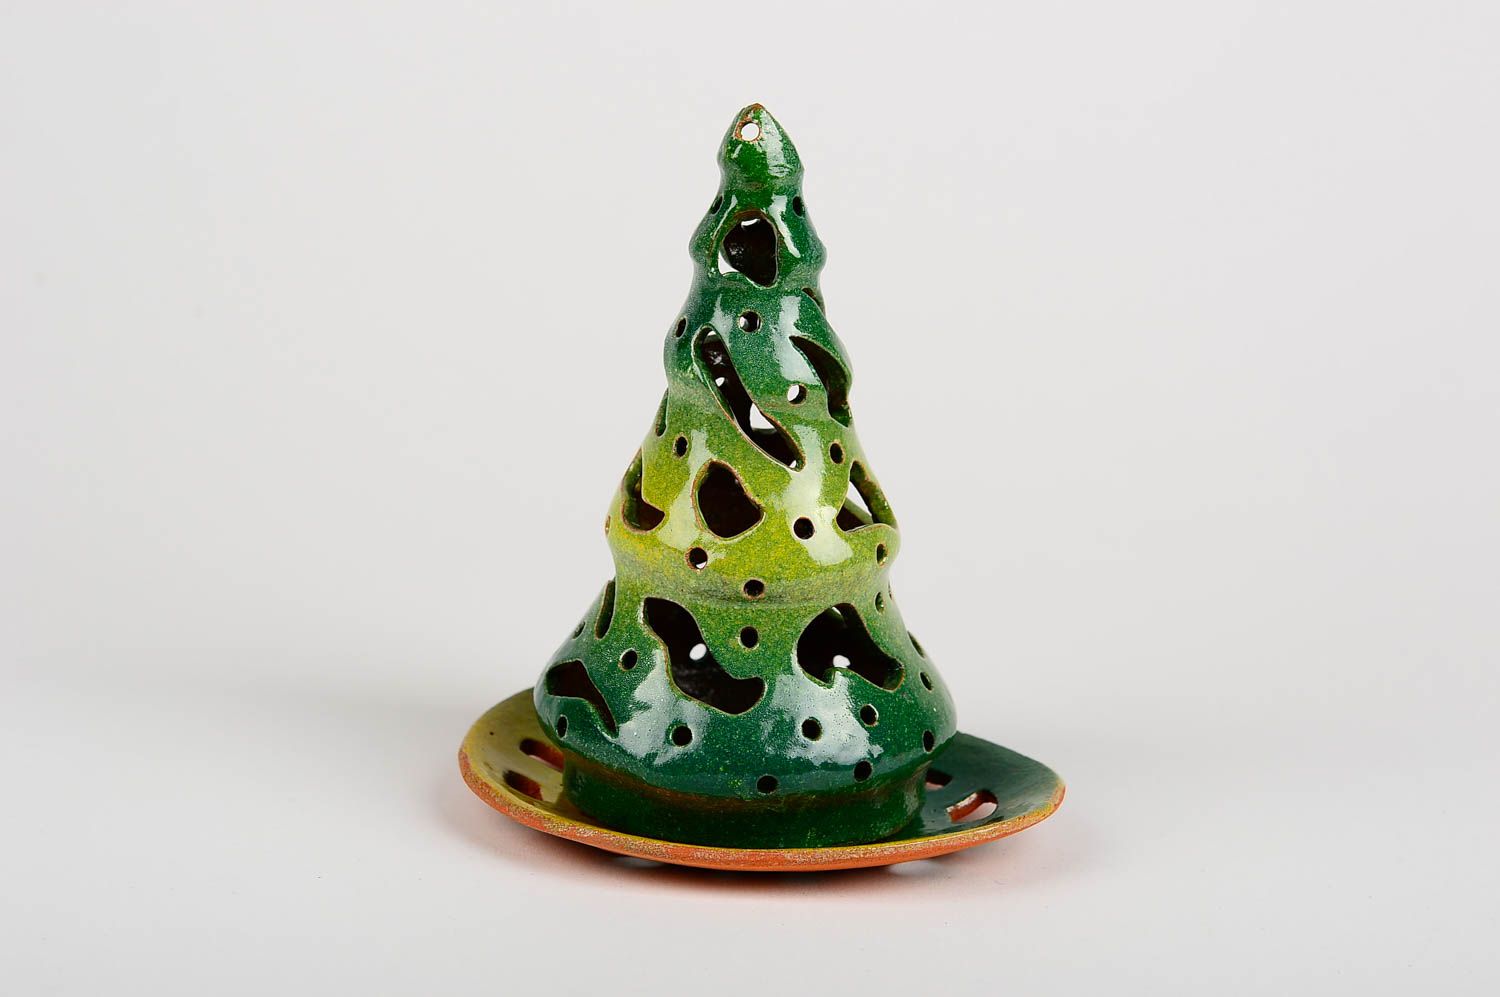 Tealight ceramic light-glow green Christmas tree candle holder 6,6 inches, 0,4 lb photo 1